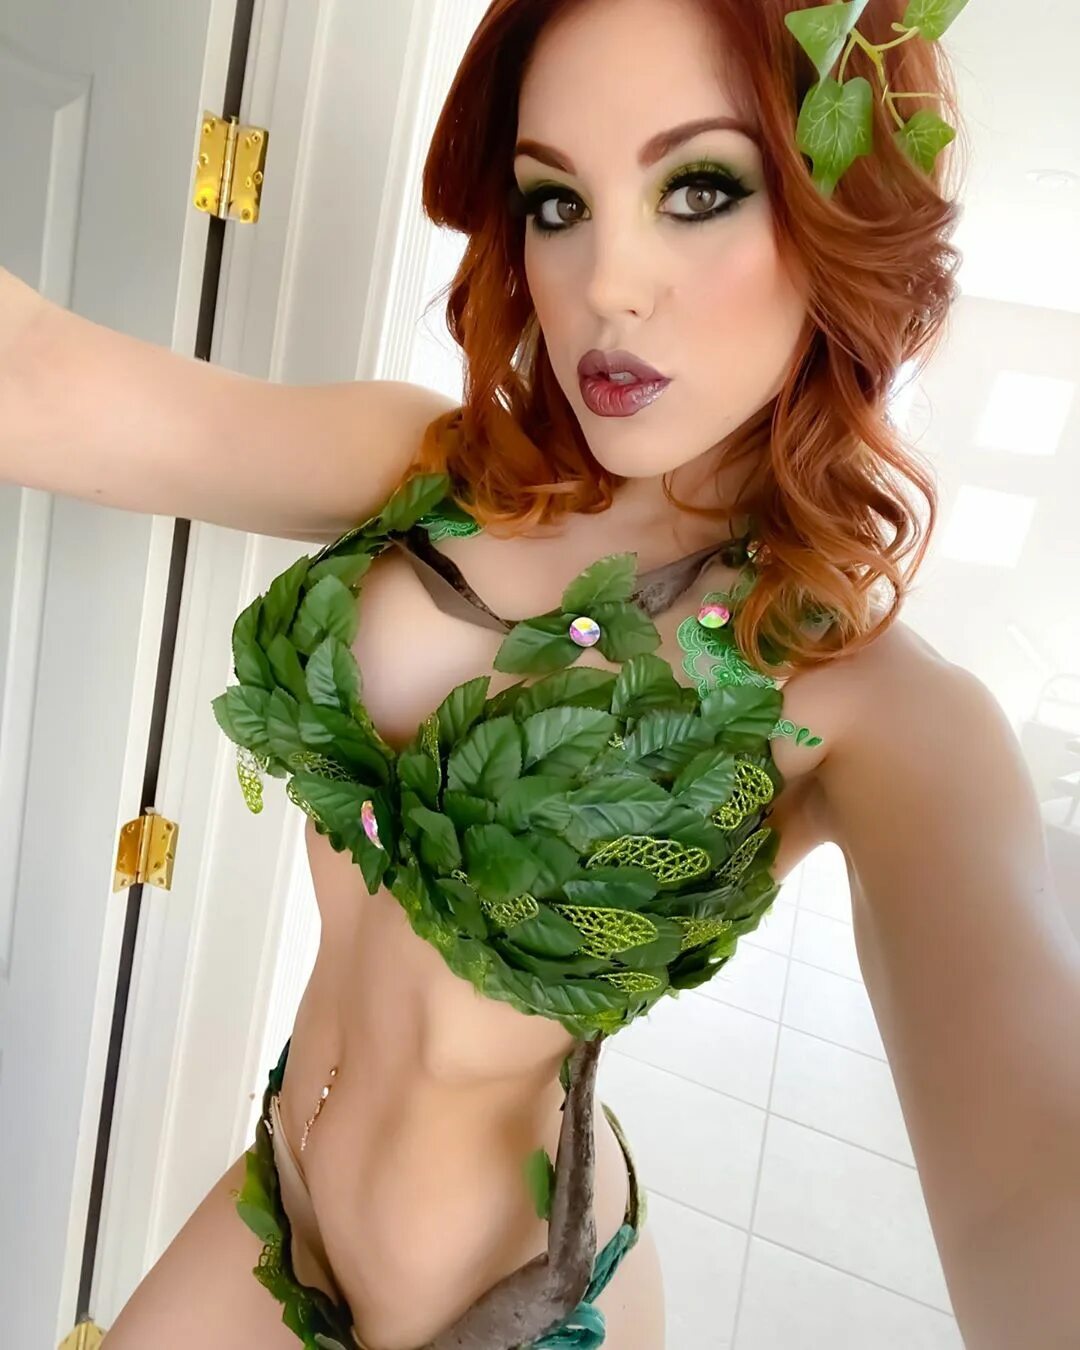 Molly Stewart auf Instagram: "Which #PoisonIvy pic do you like more? 